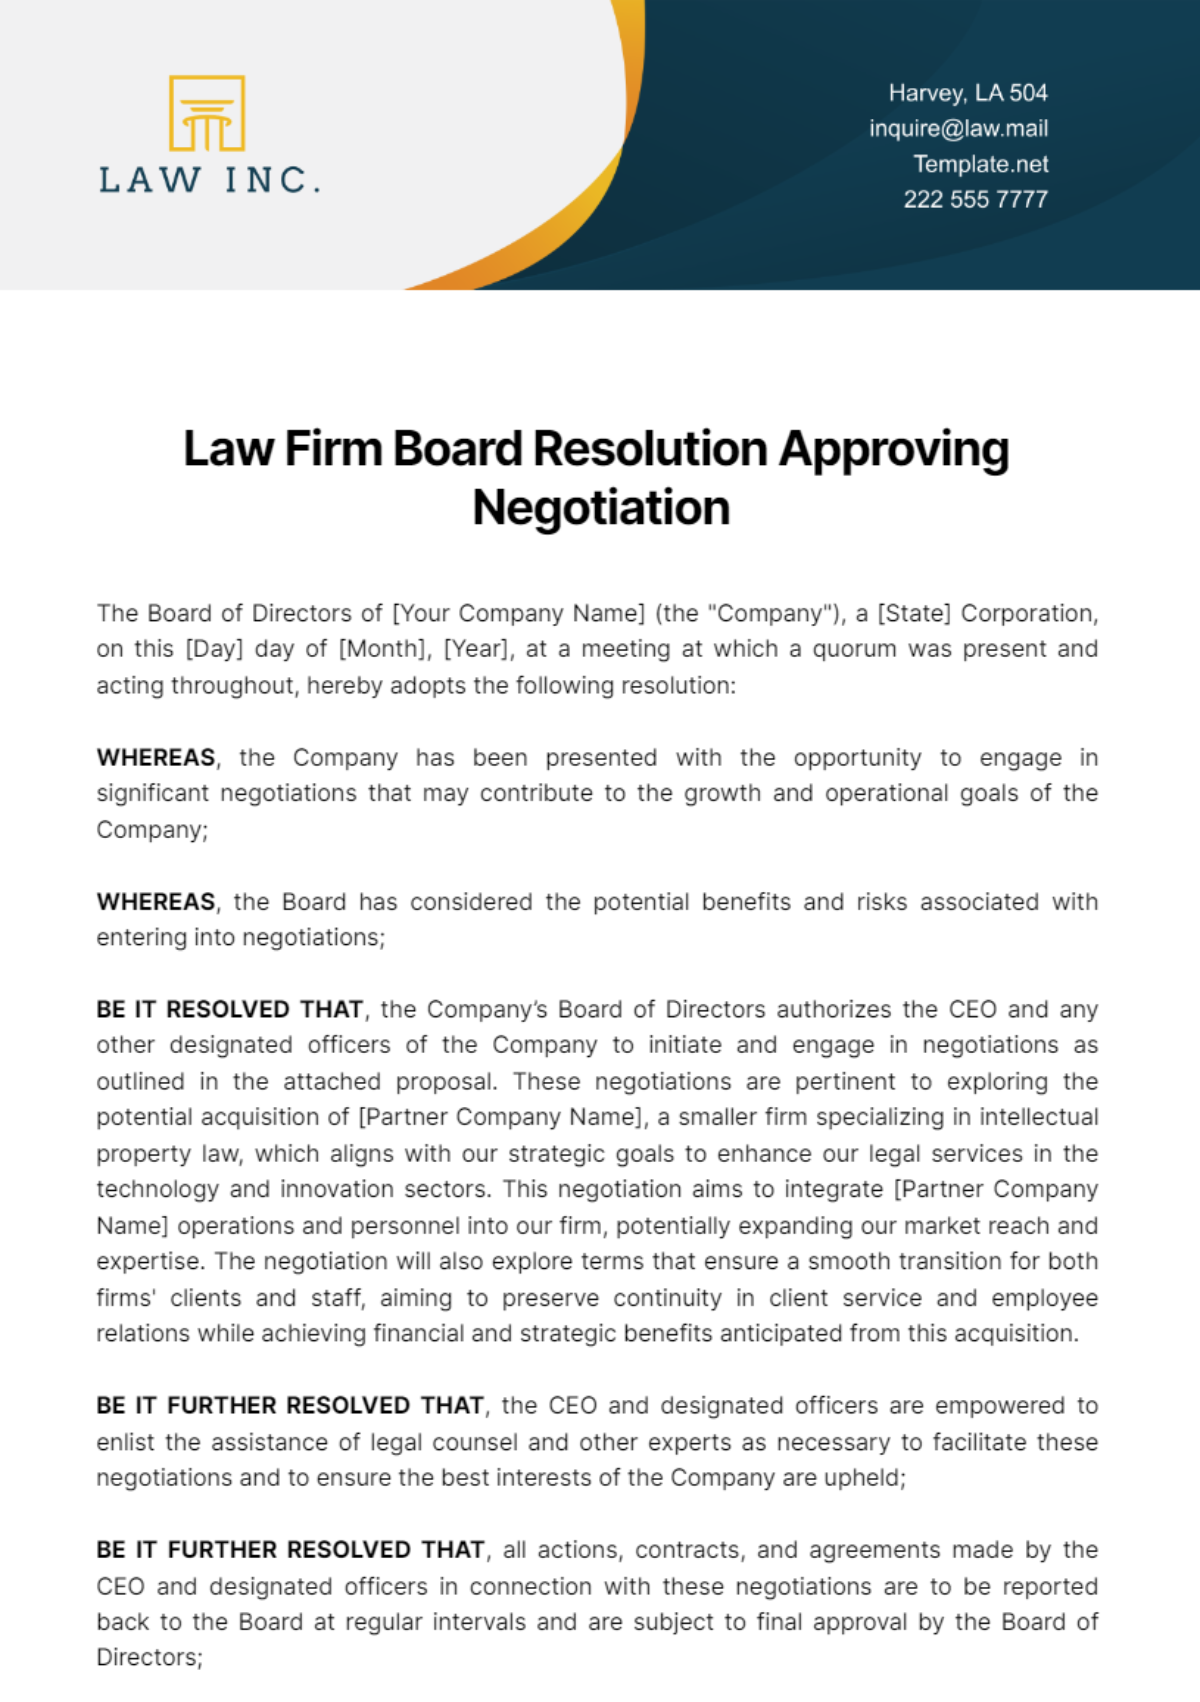 Law Firm Board Resolution Approving Negotiation Template